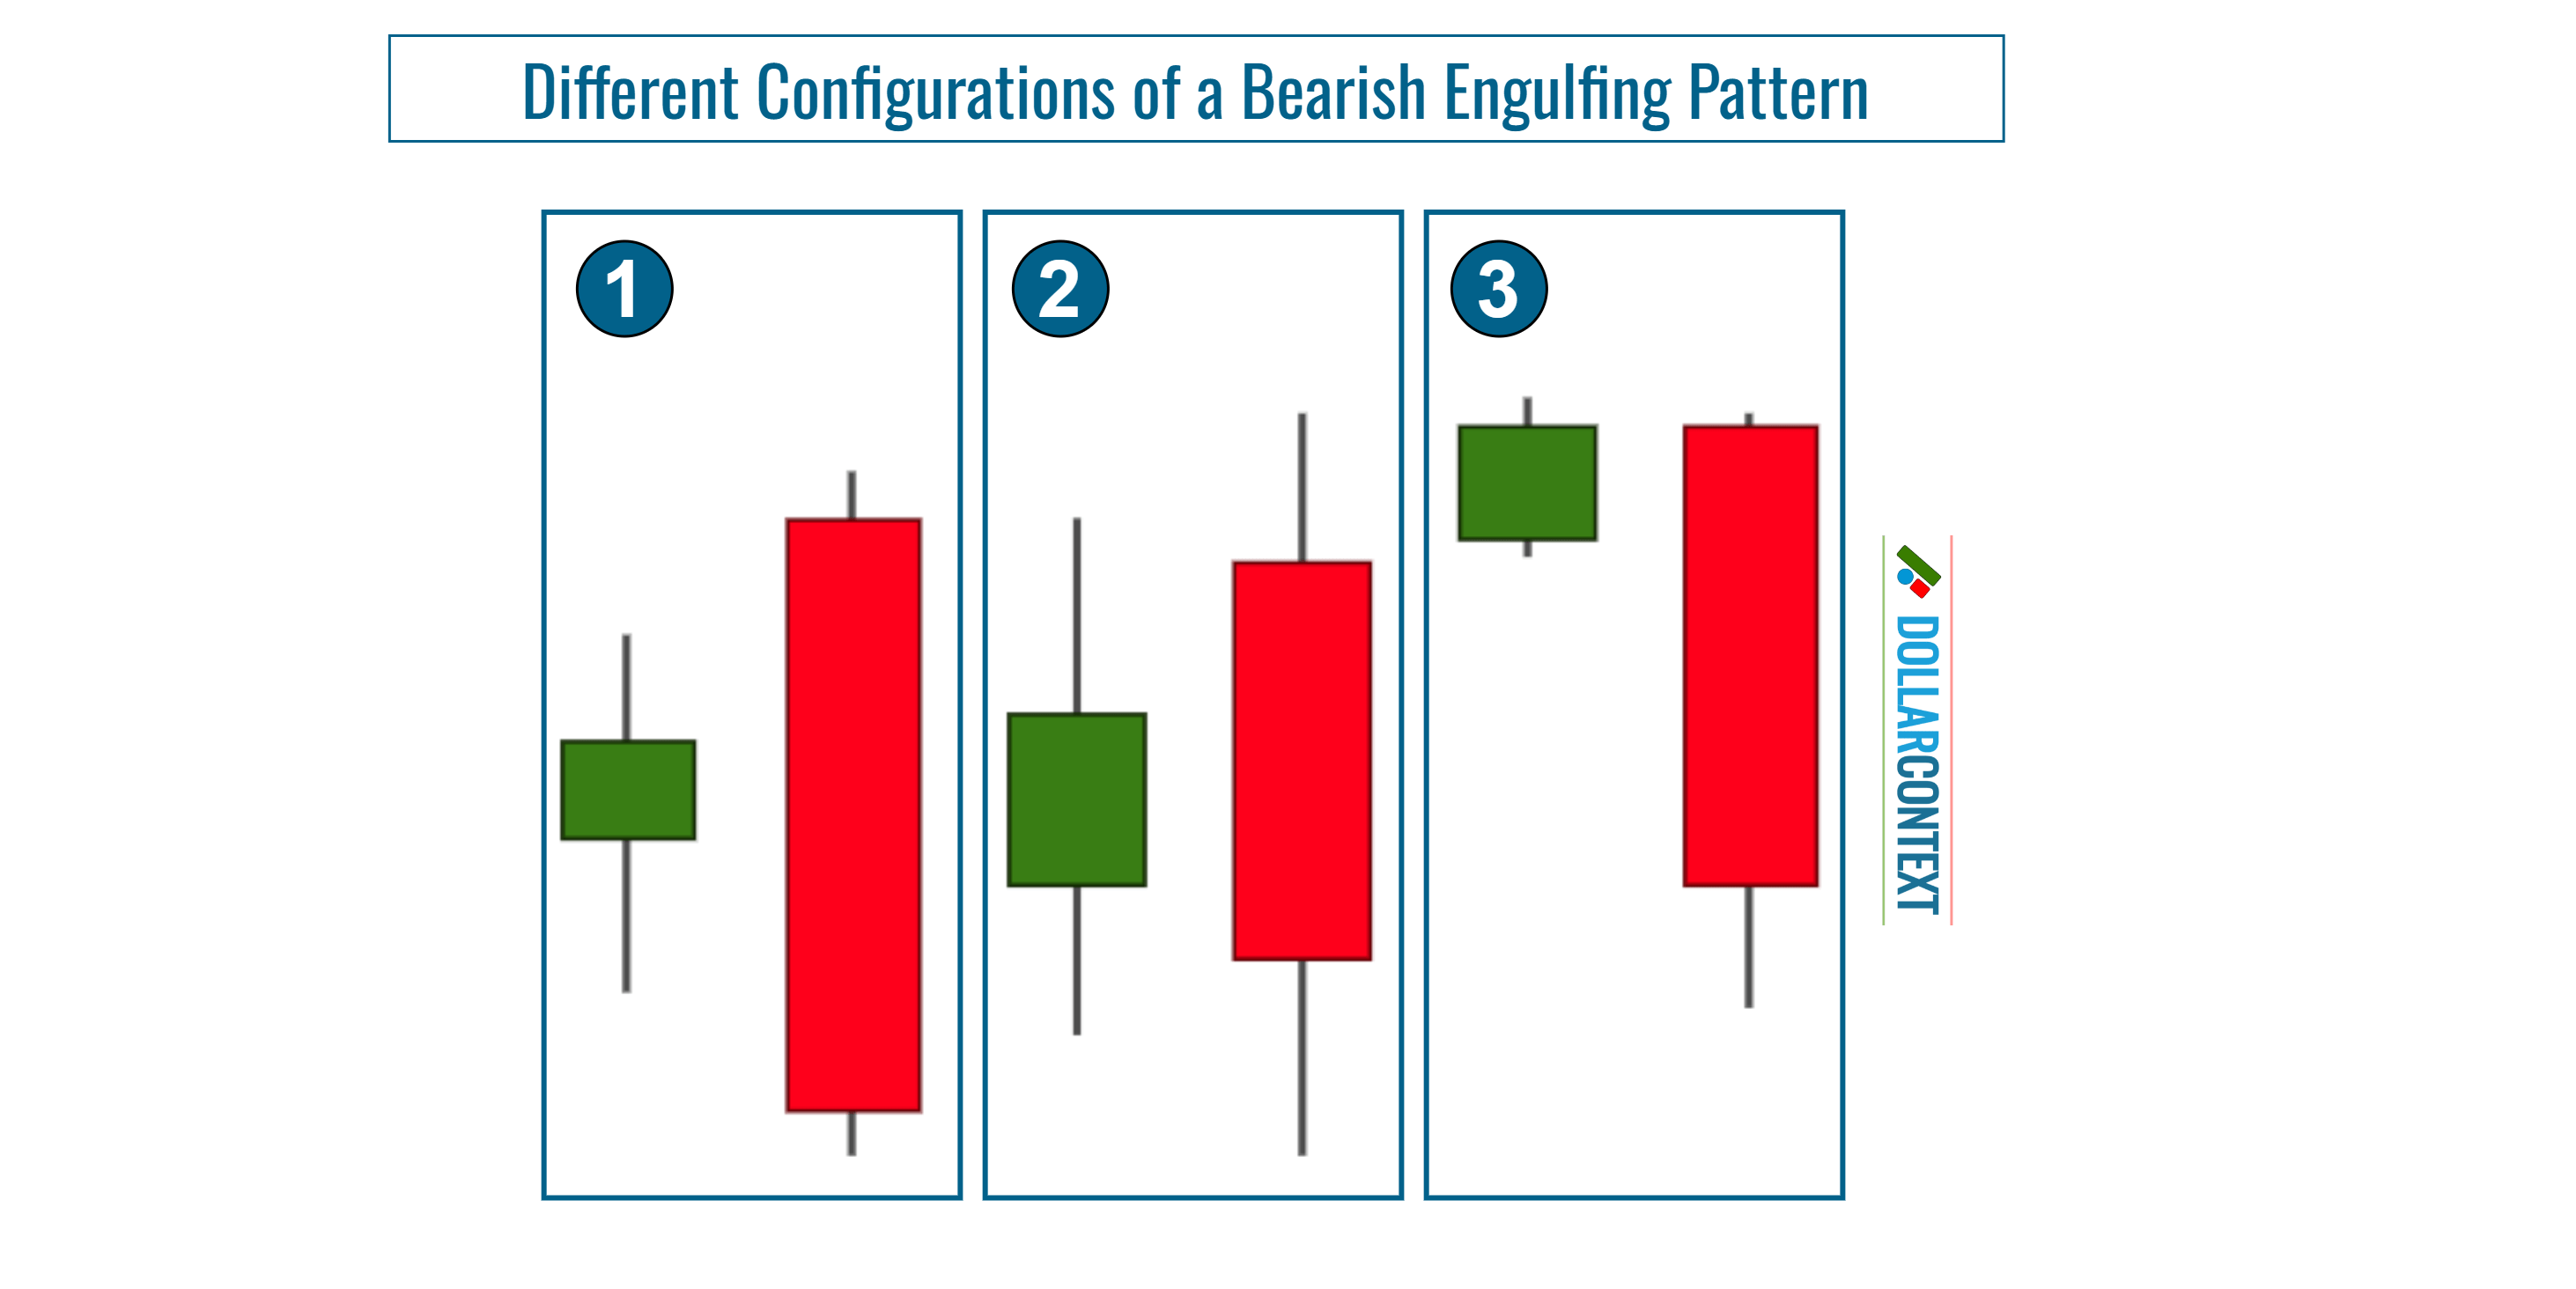 Different Variations of a Bearish Engulfing Pattern